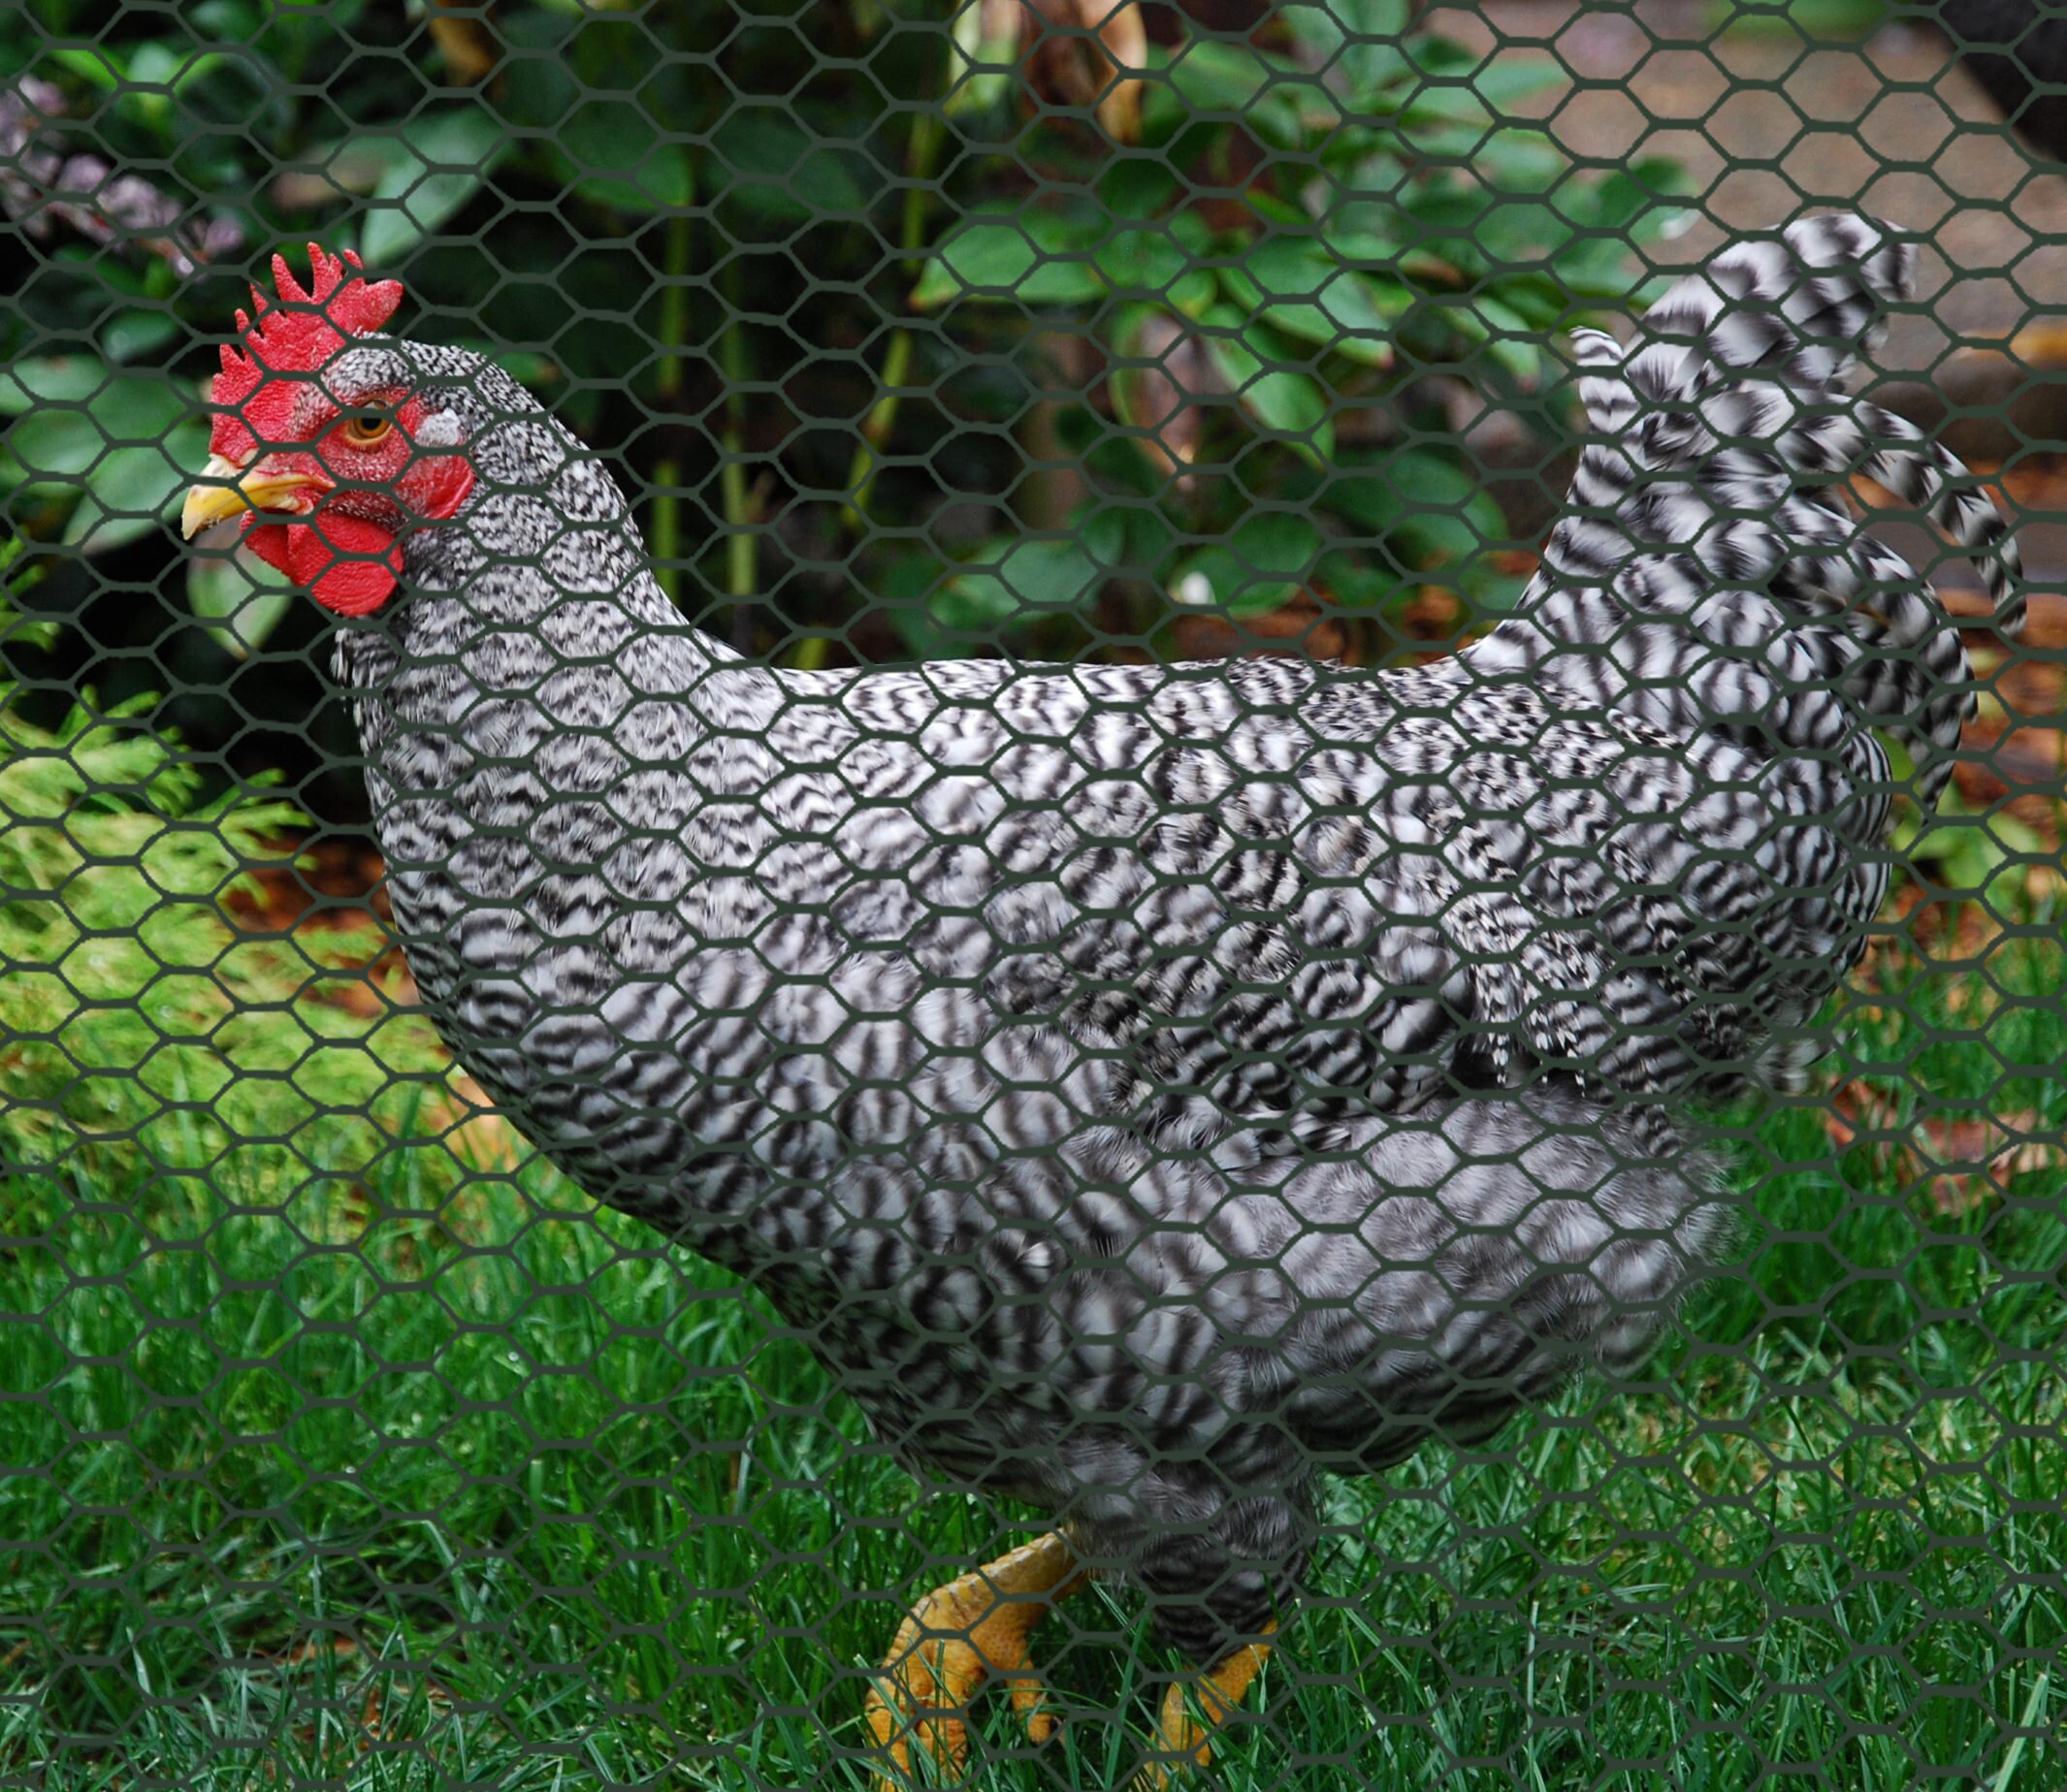 2 x 25, Green Garden Fence Boen Poultry hex Netting Plastic Temporary Barrier Chicken Wire Protection Yard 